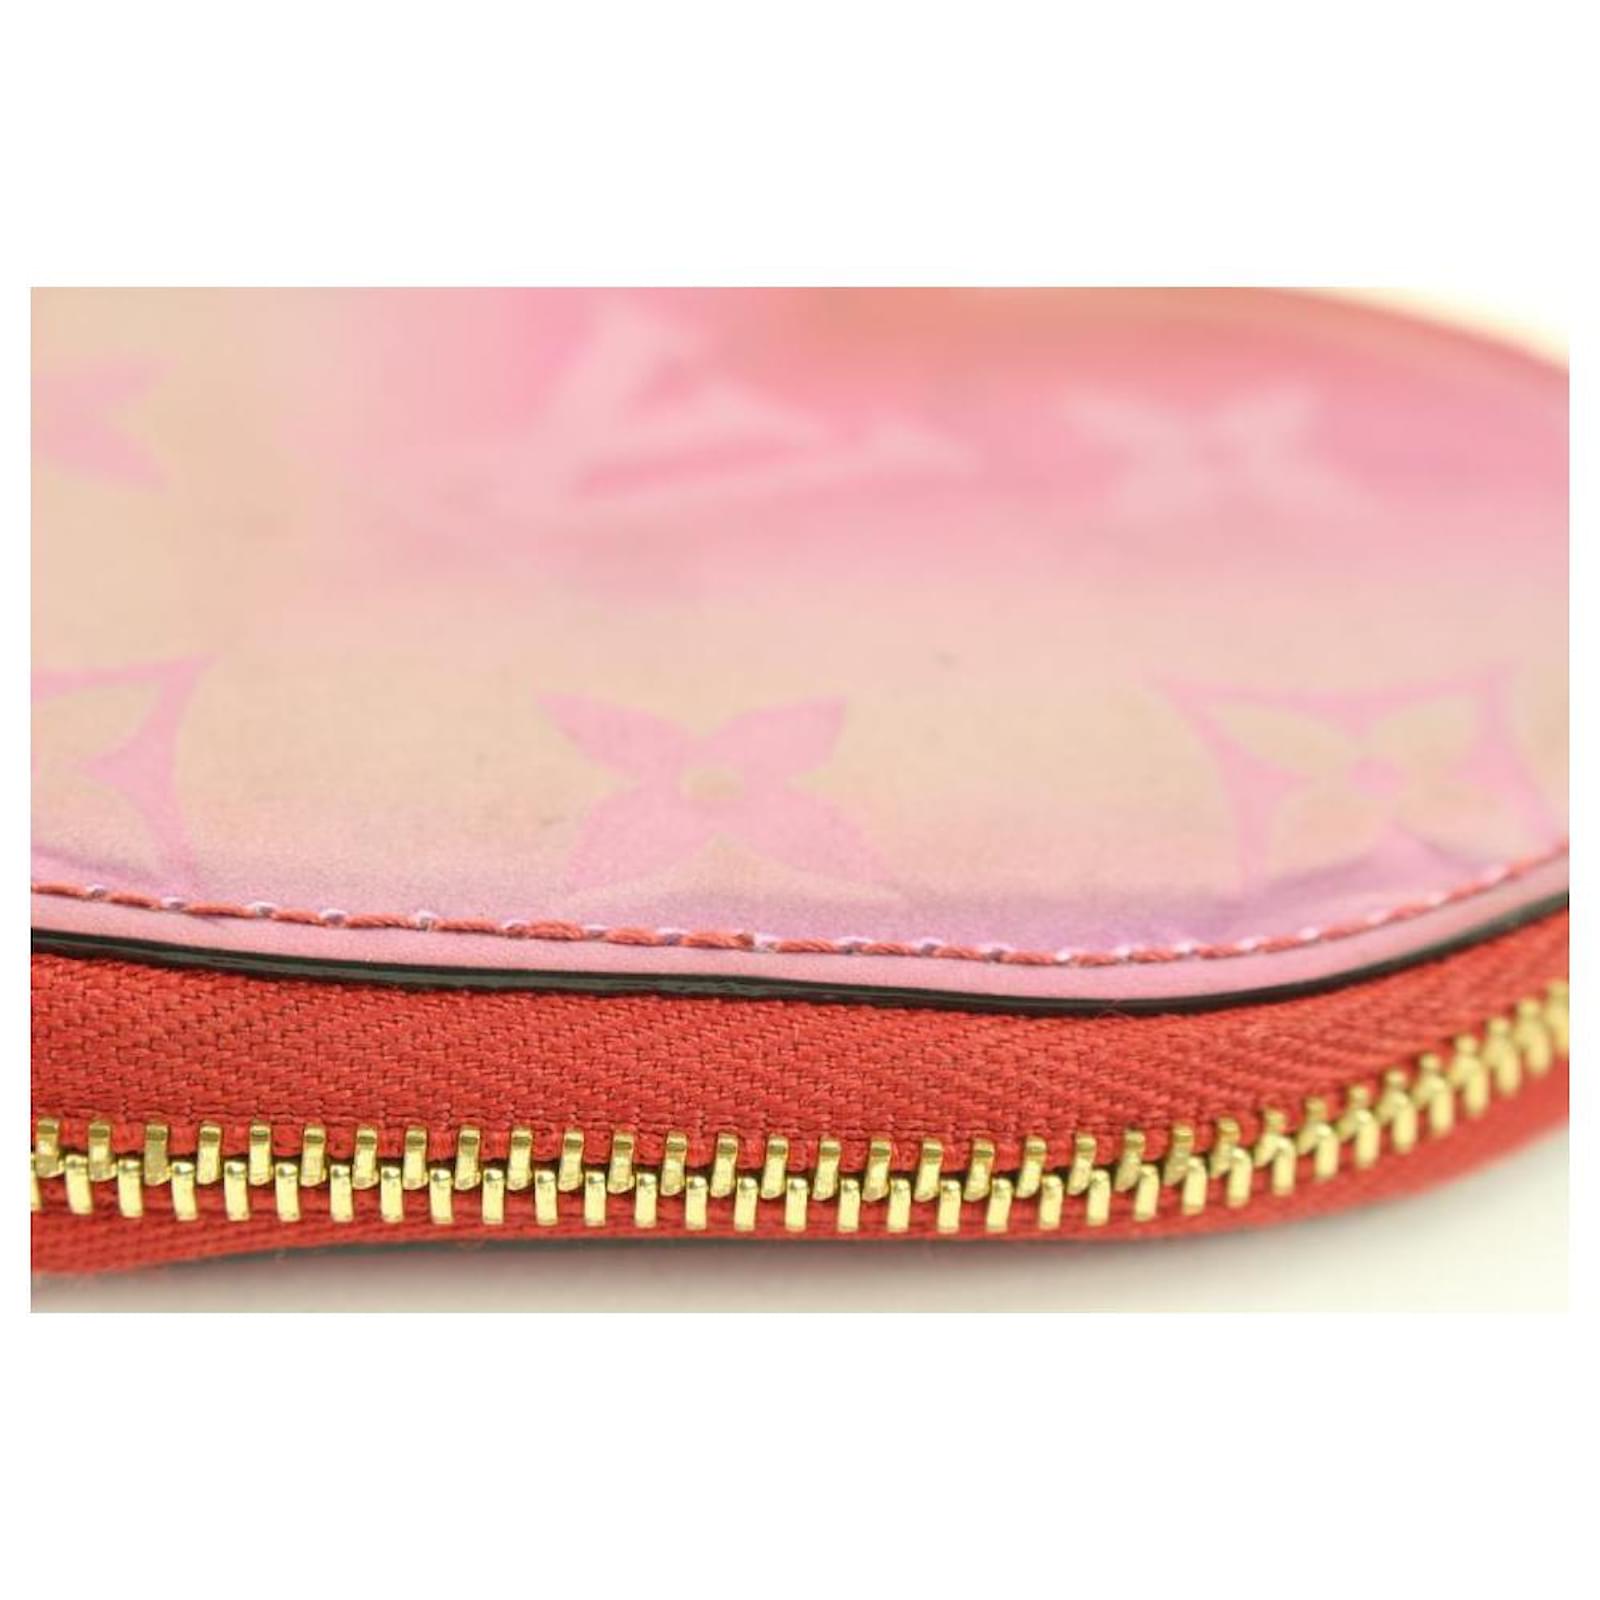 Louis Vuitton Heart Coin Purse Limited Edition Degrade Monogram Vernis -  ShopStyle Wallets & Card Holders